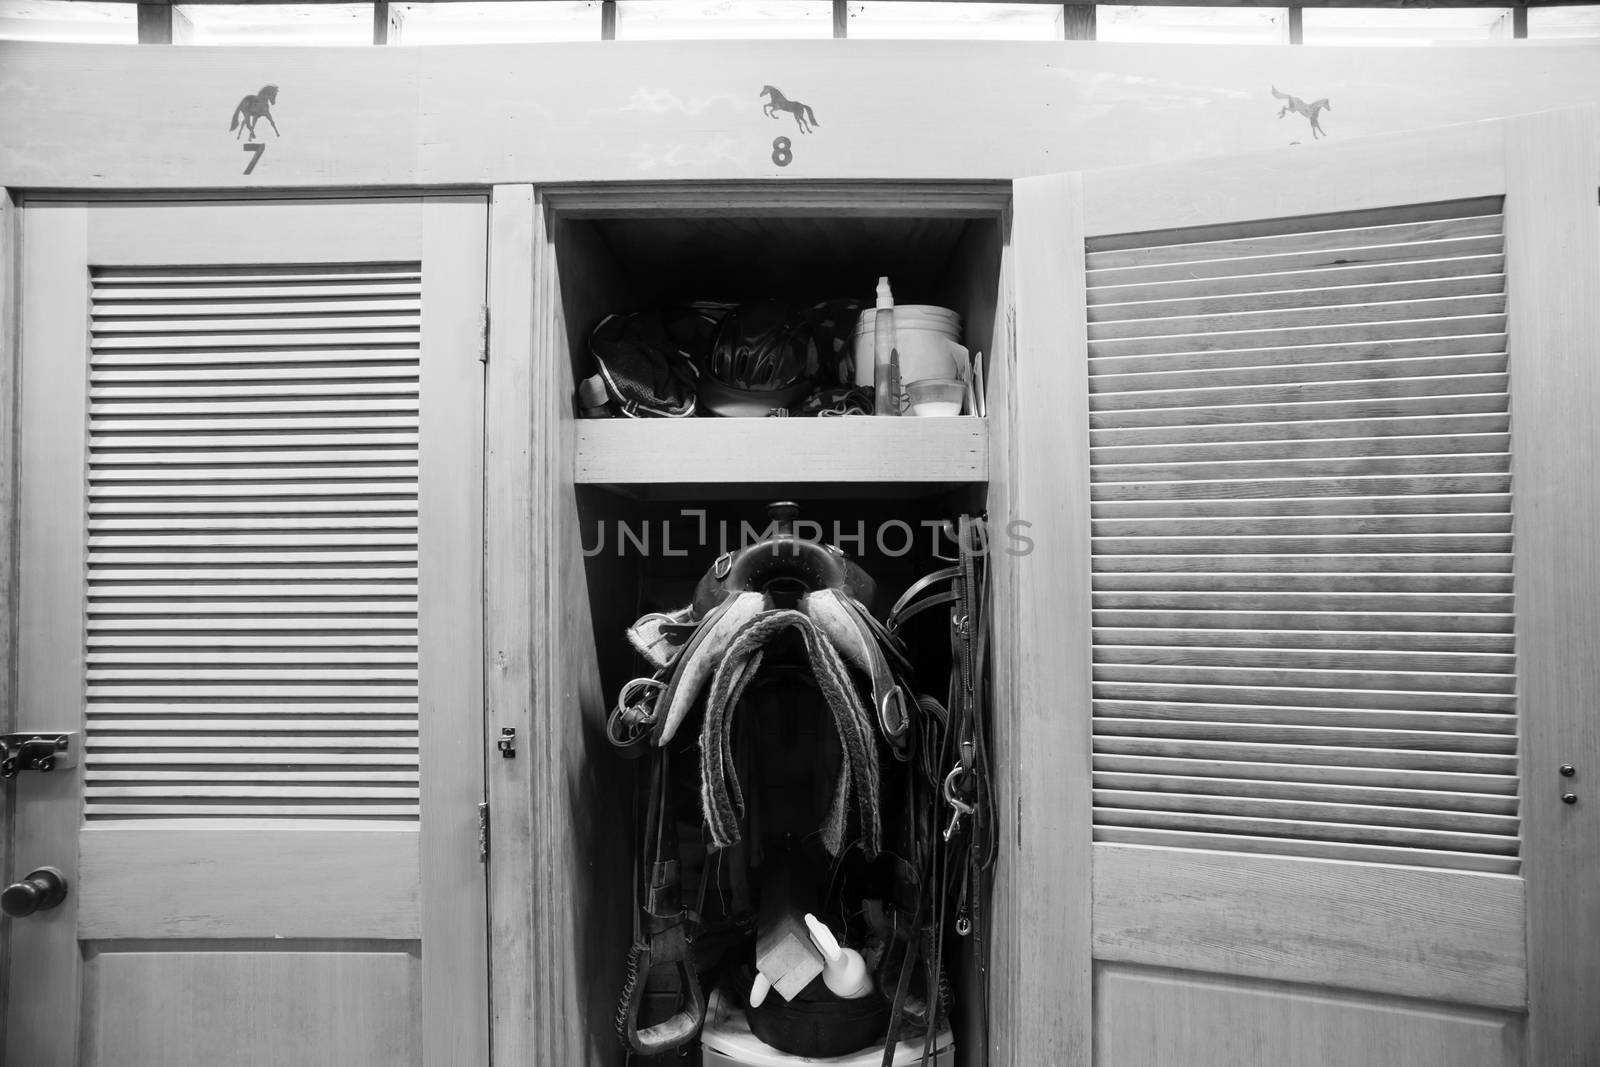 A rider keeps gear close to her horse in this tack closet